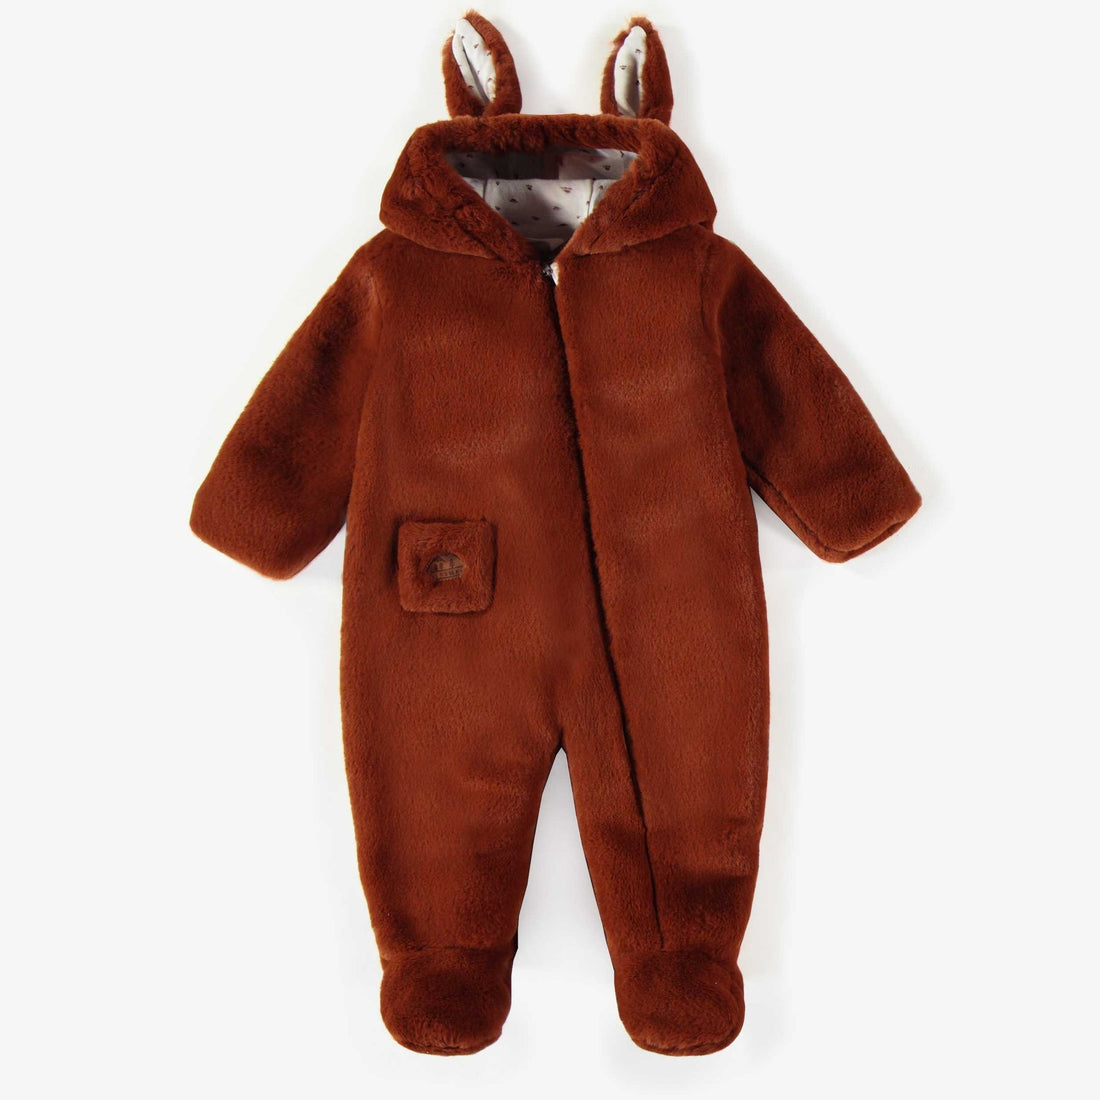 BROWN ONE-PIECE IN PLUSH WITH INTEGRATED FEET, NEWBORN